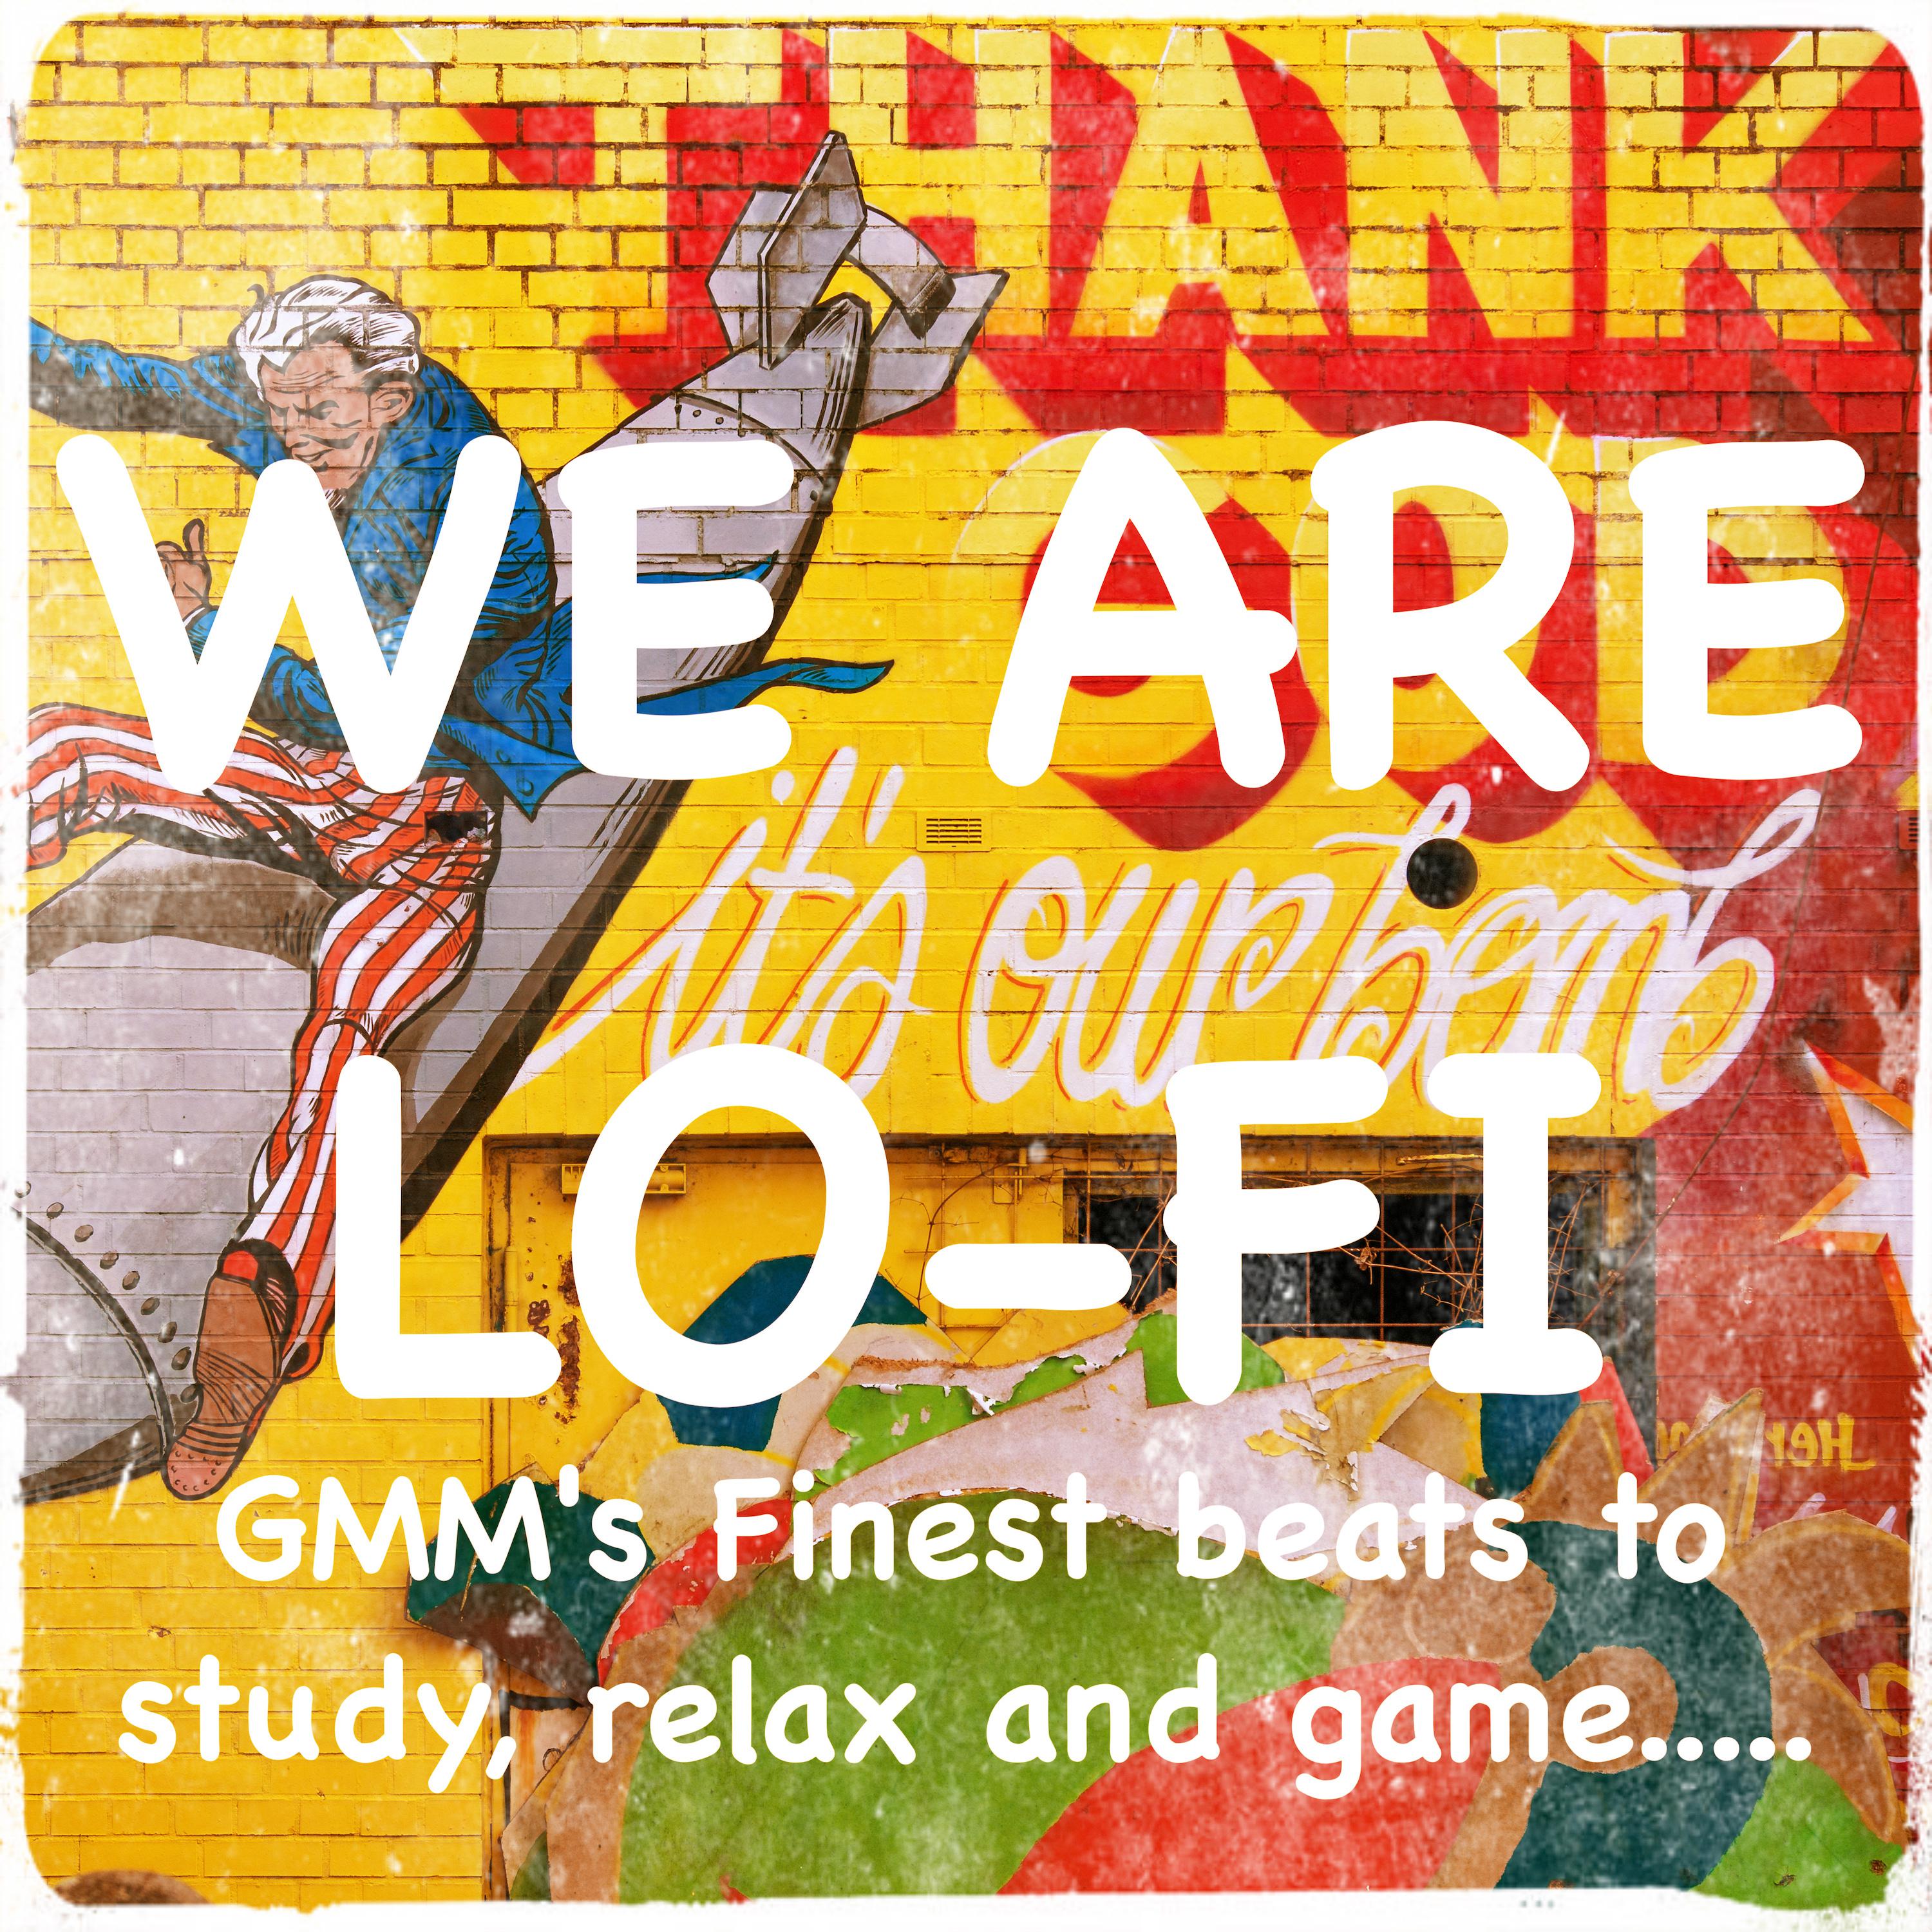 We Are Lofi - GMM's Finest Beats to Study, Relax and Game.....